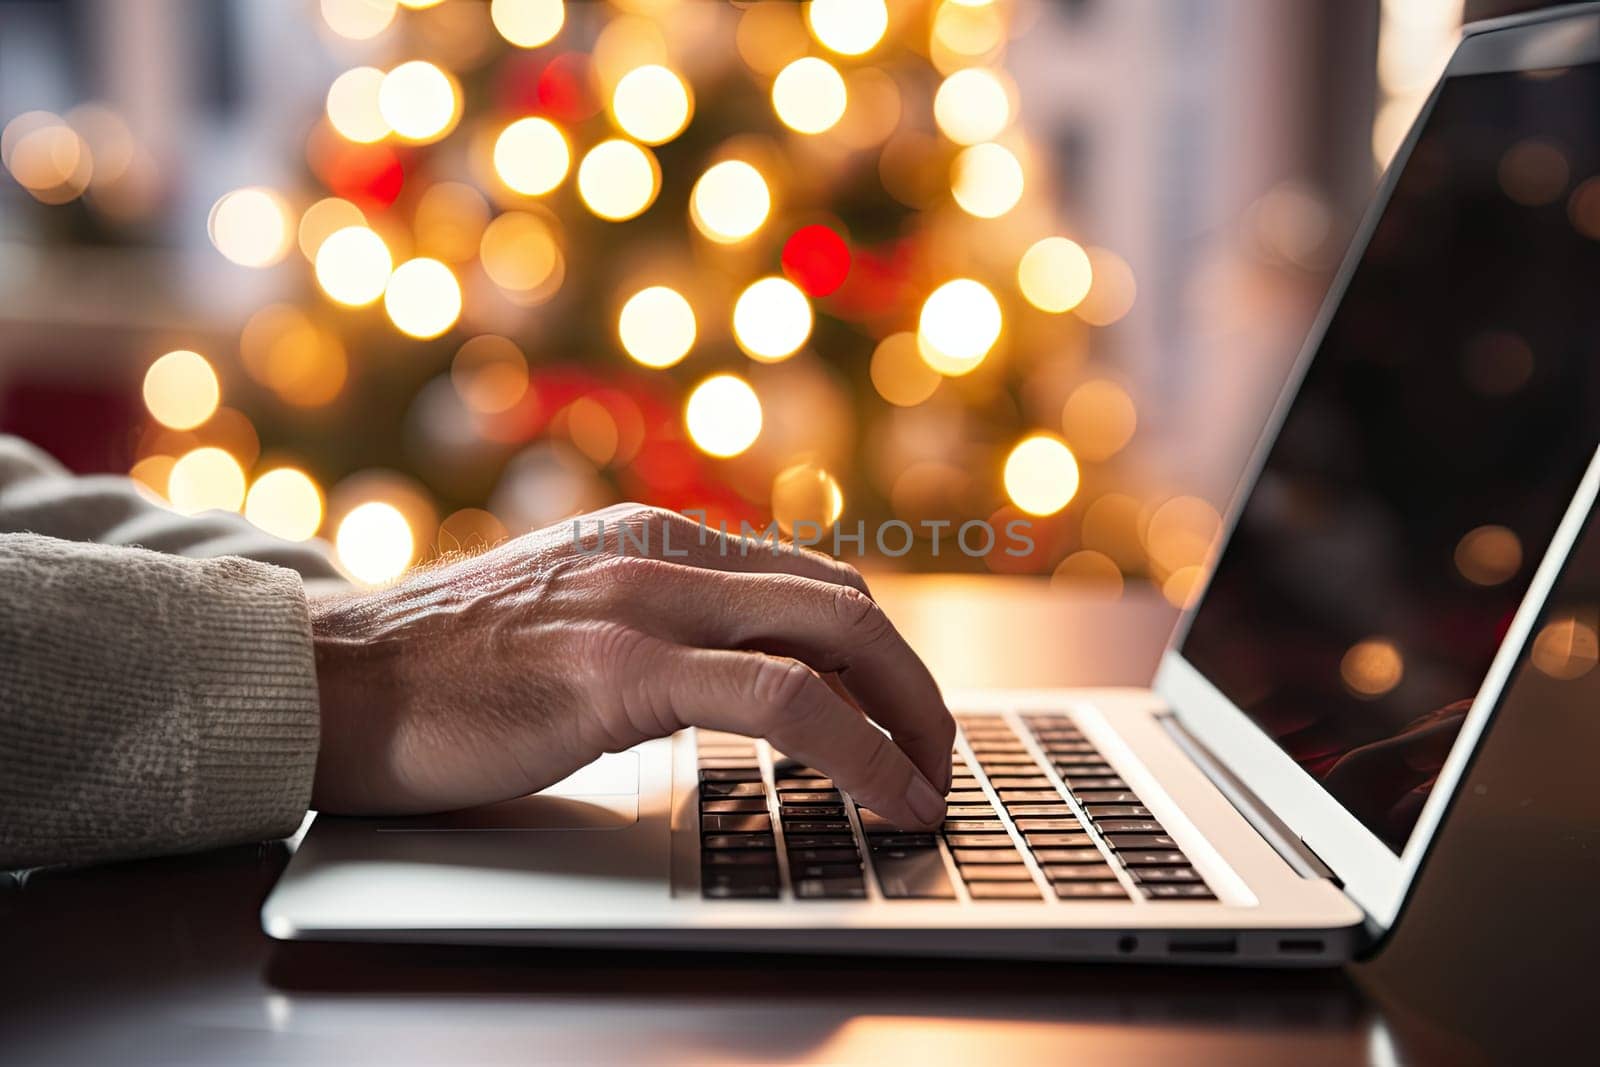 a person typing on a laptop computer with christmas by golibtolibov